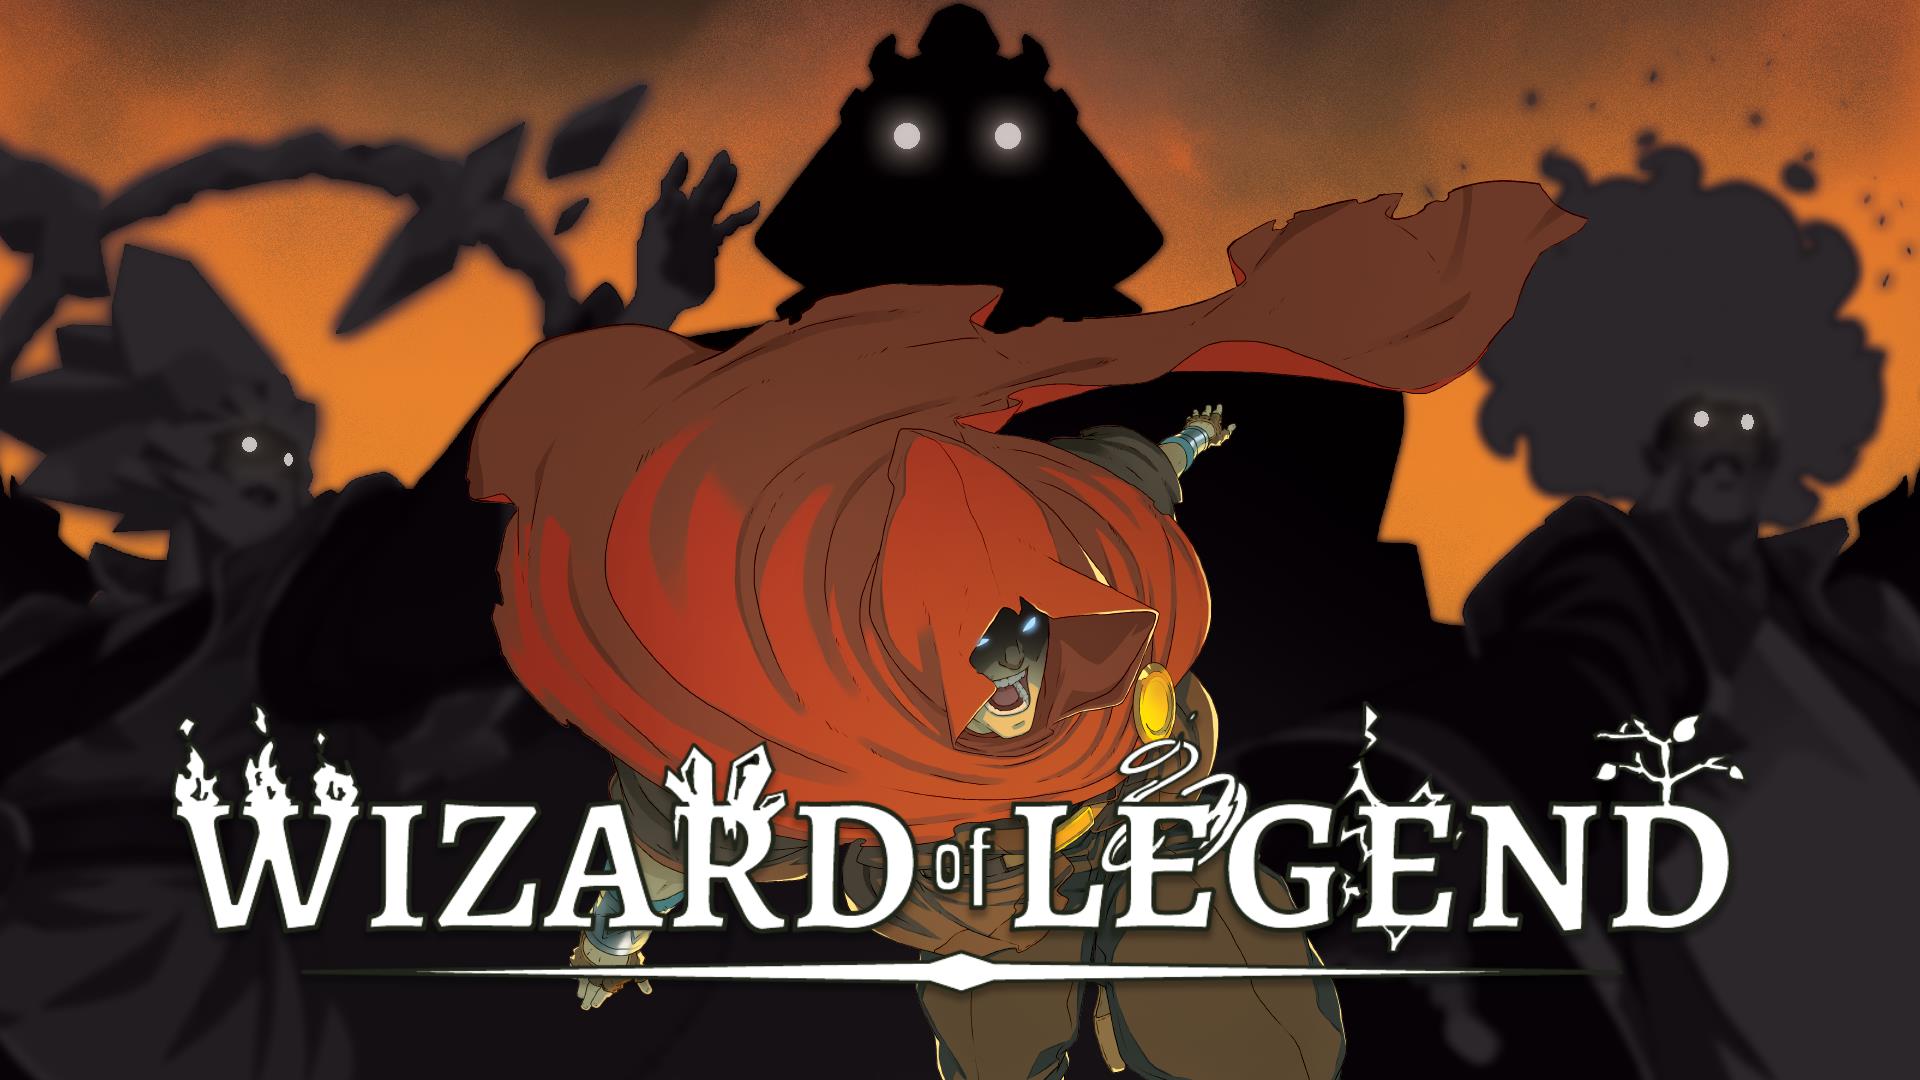 Image for Wizard of Legend is a 2D dungeon crawler where wizards aren't boring